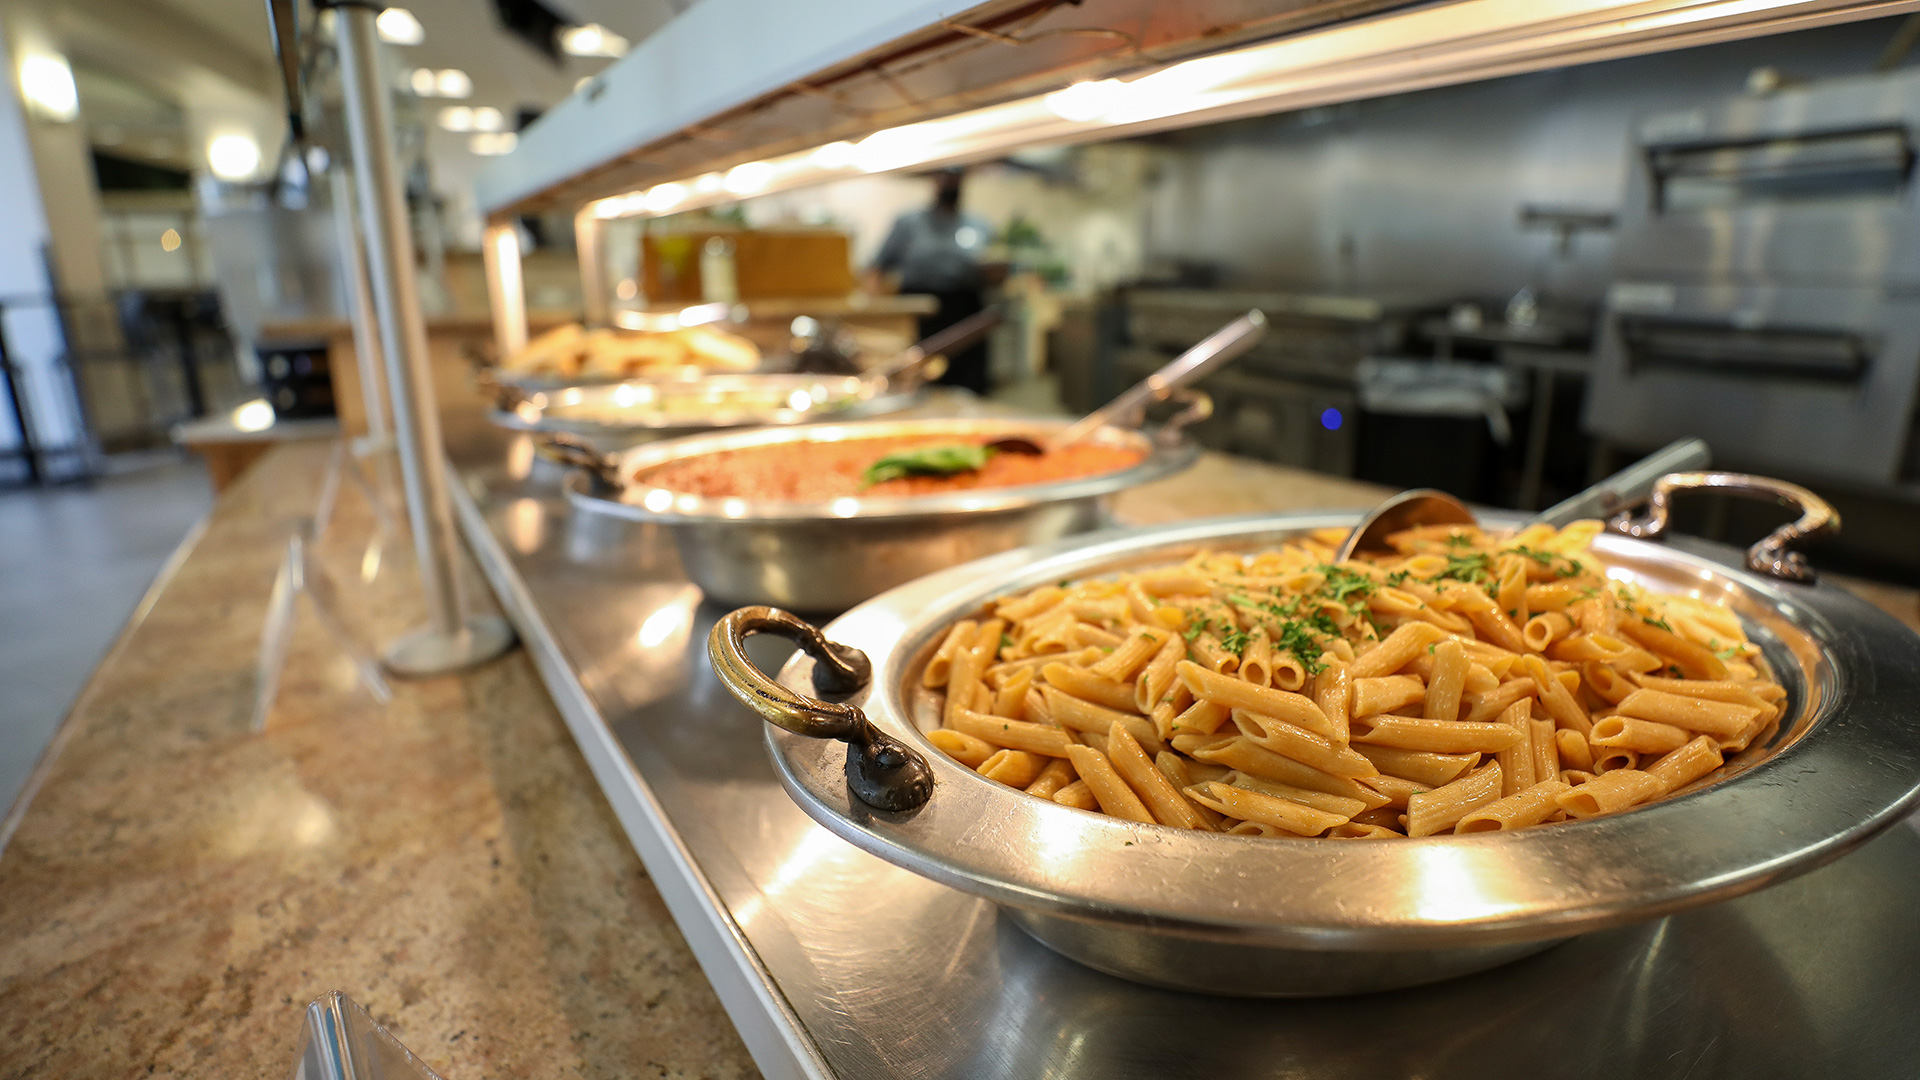 Pasta selection at the dining commons